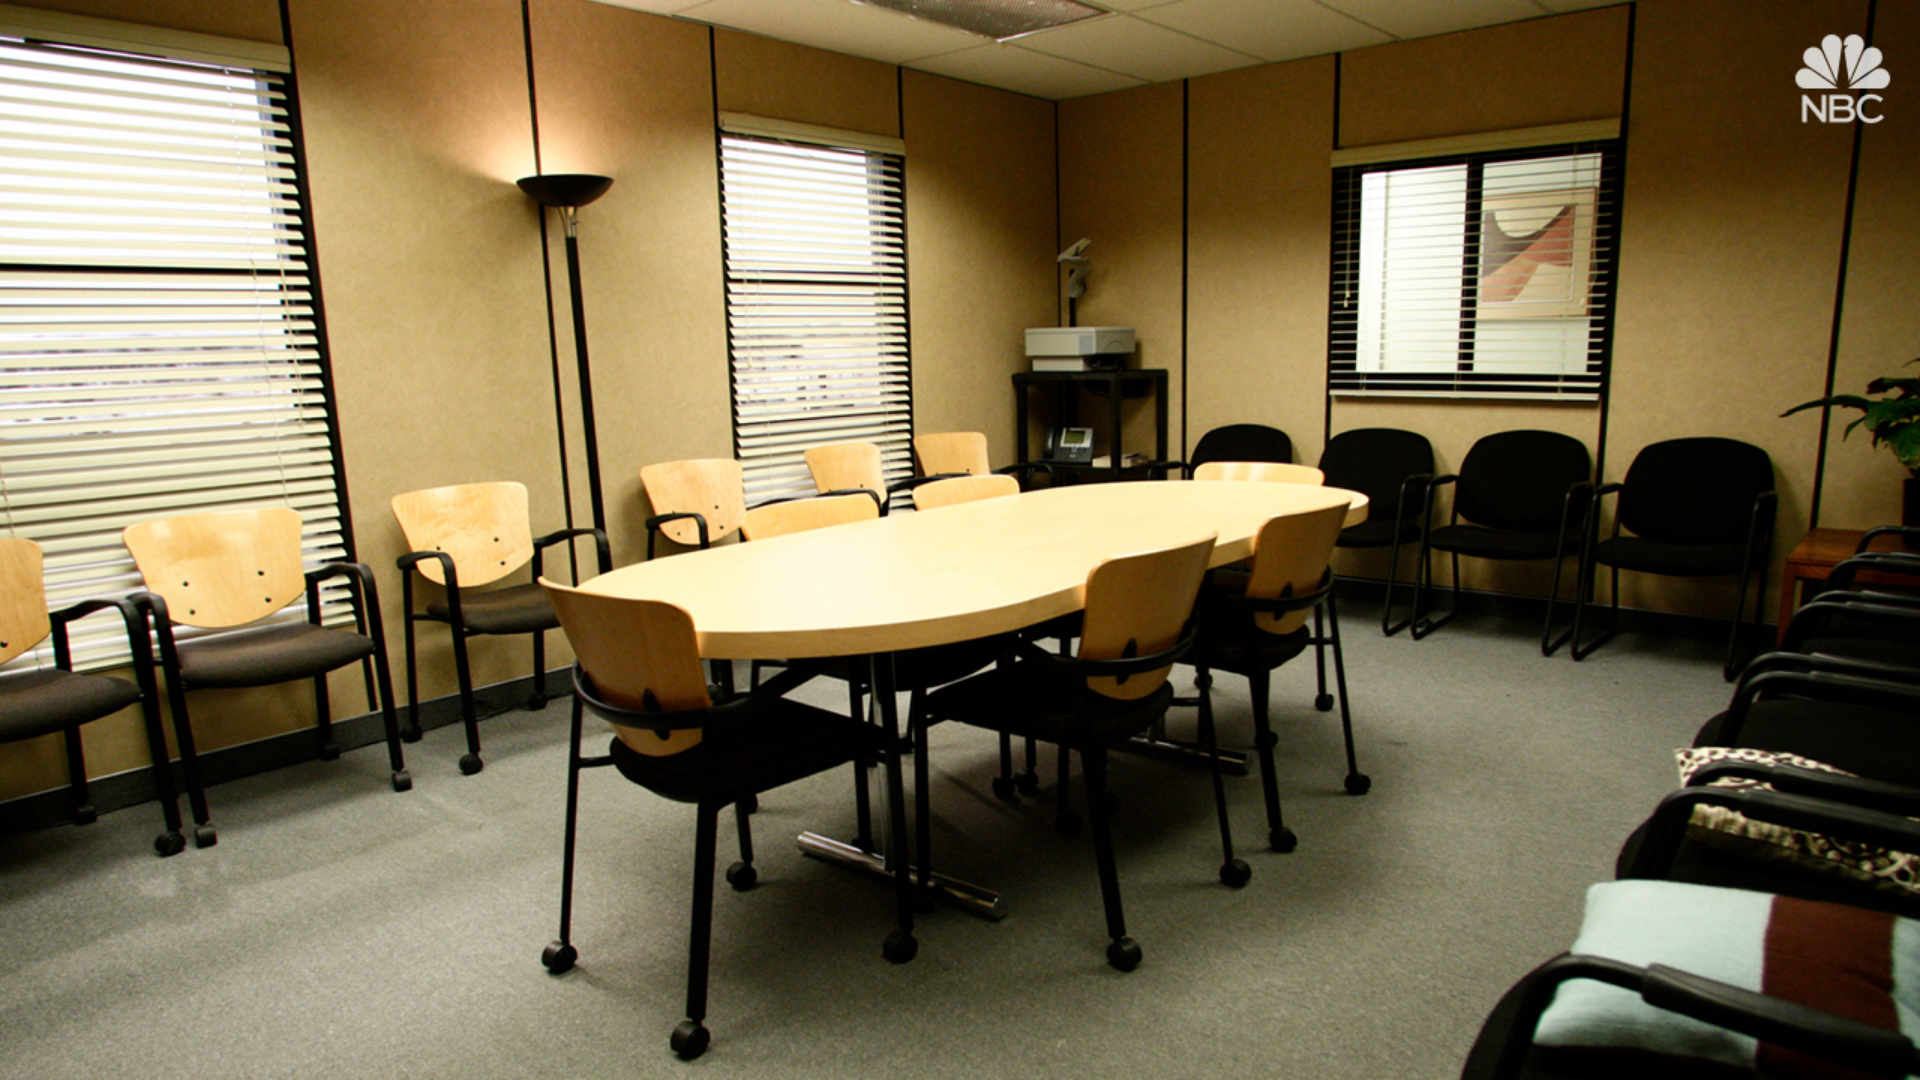 The Office, Meeting Room background for your Online Meetings